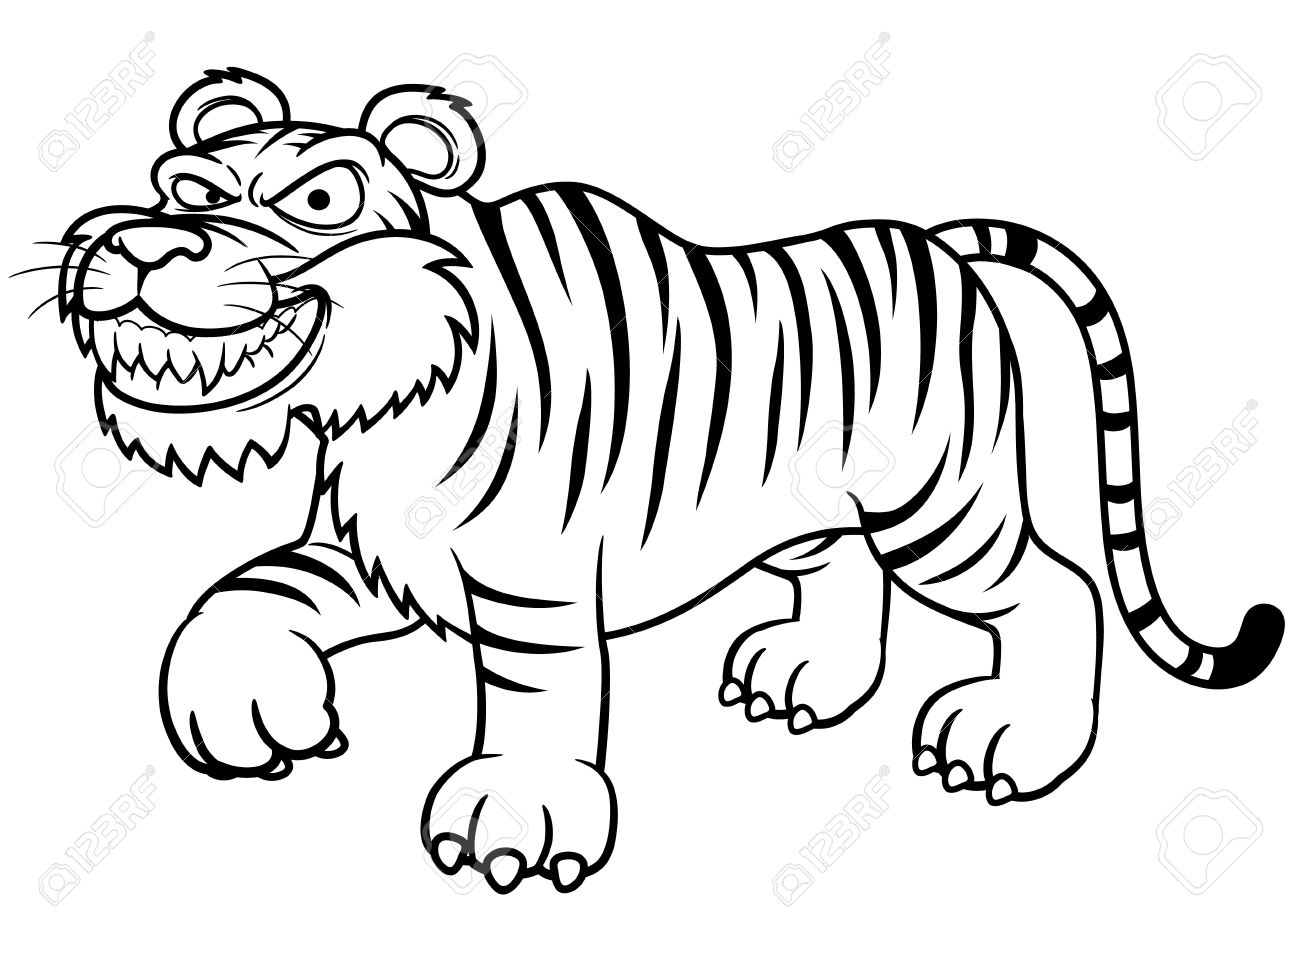 Tiger With Creepy Smile Coloring - Play Free Coloring Game Online